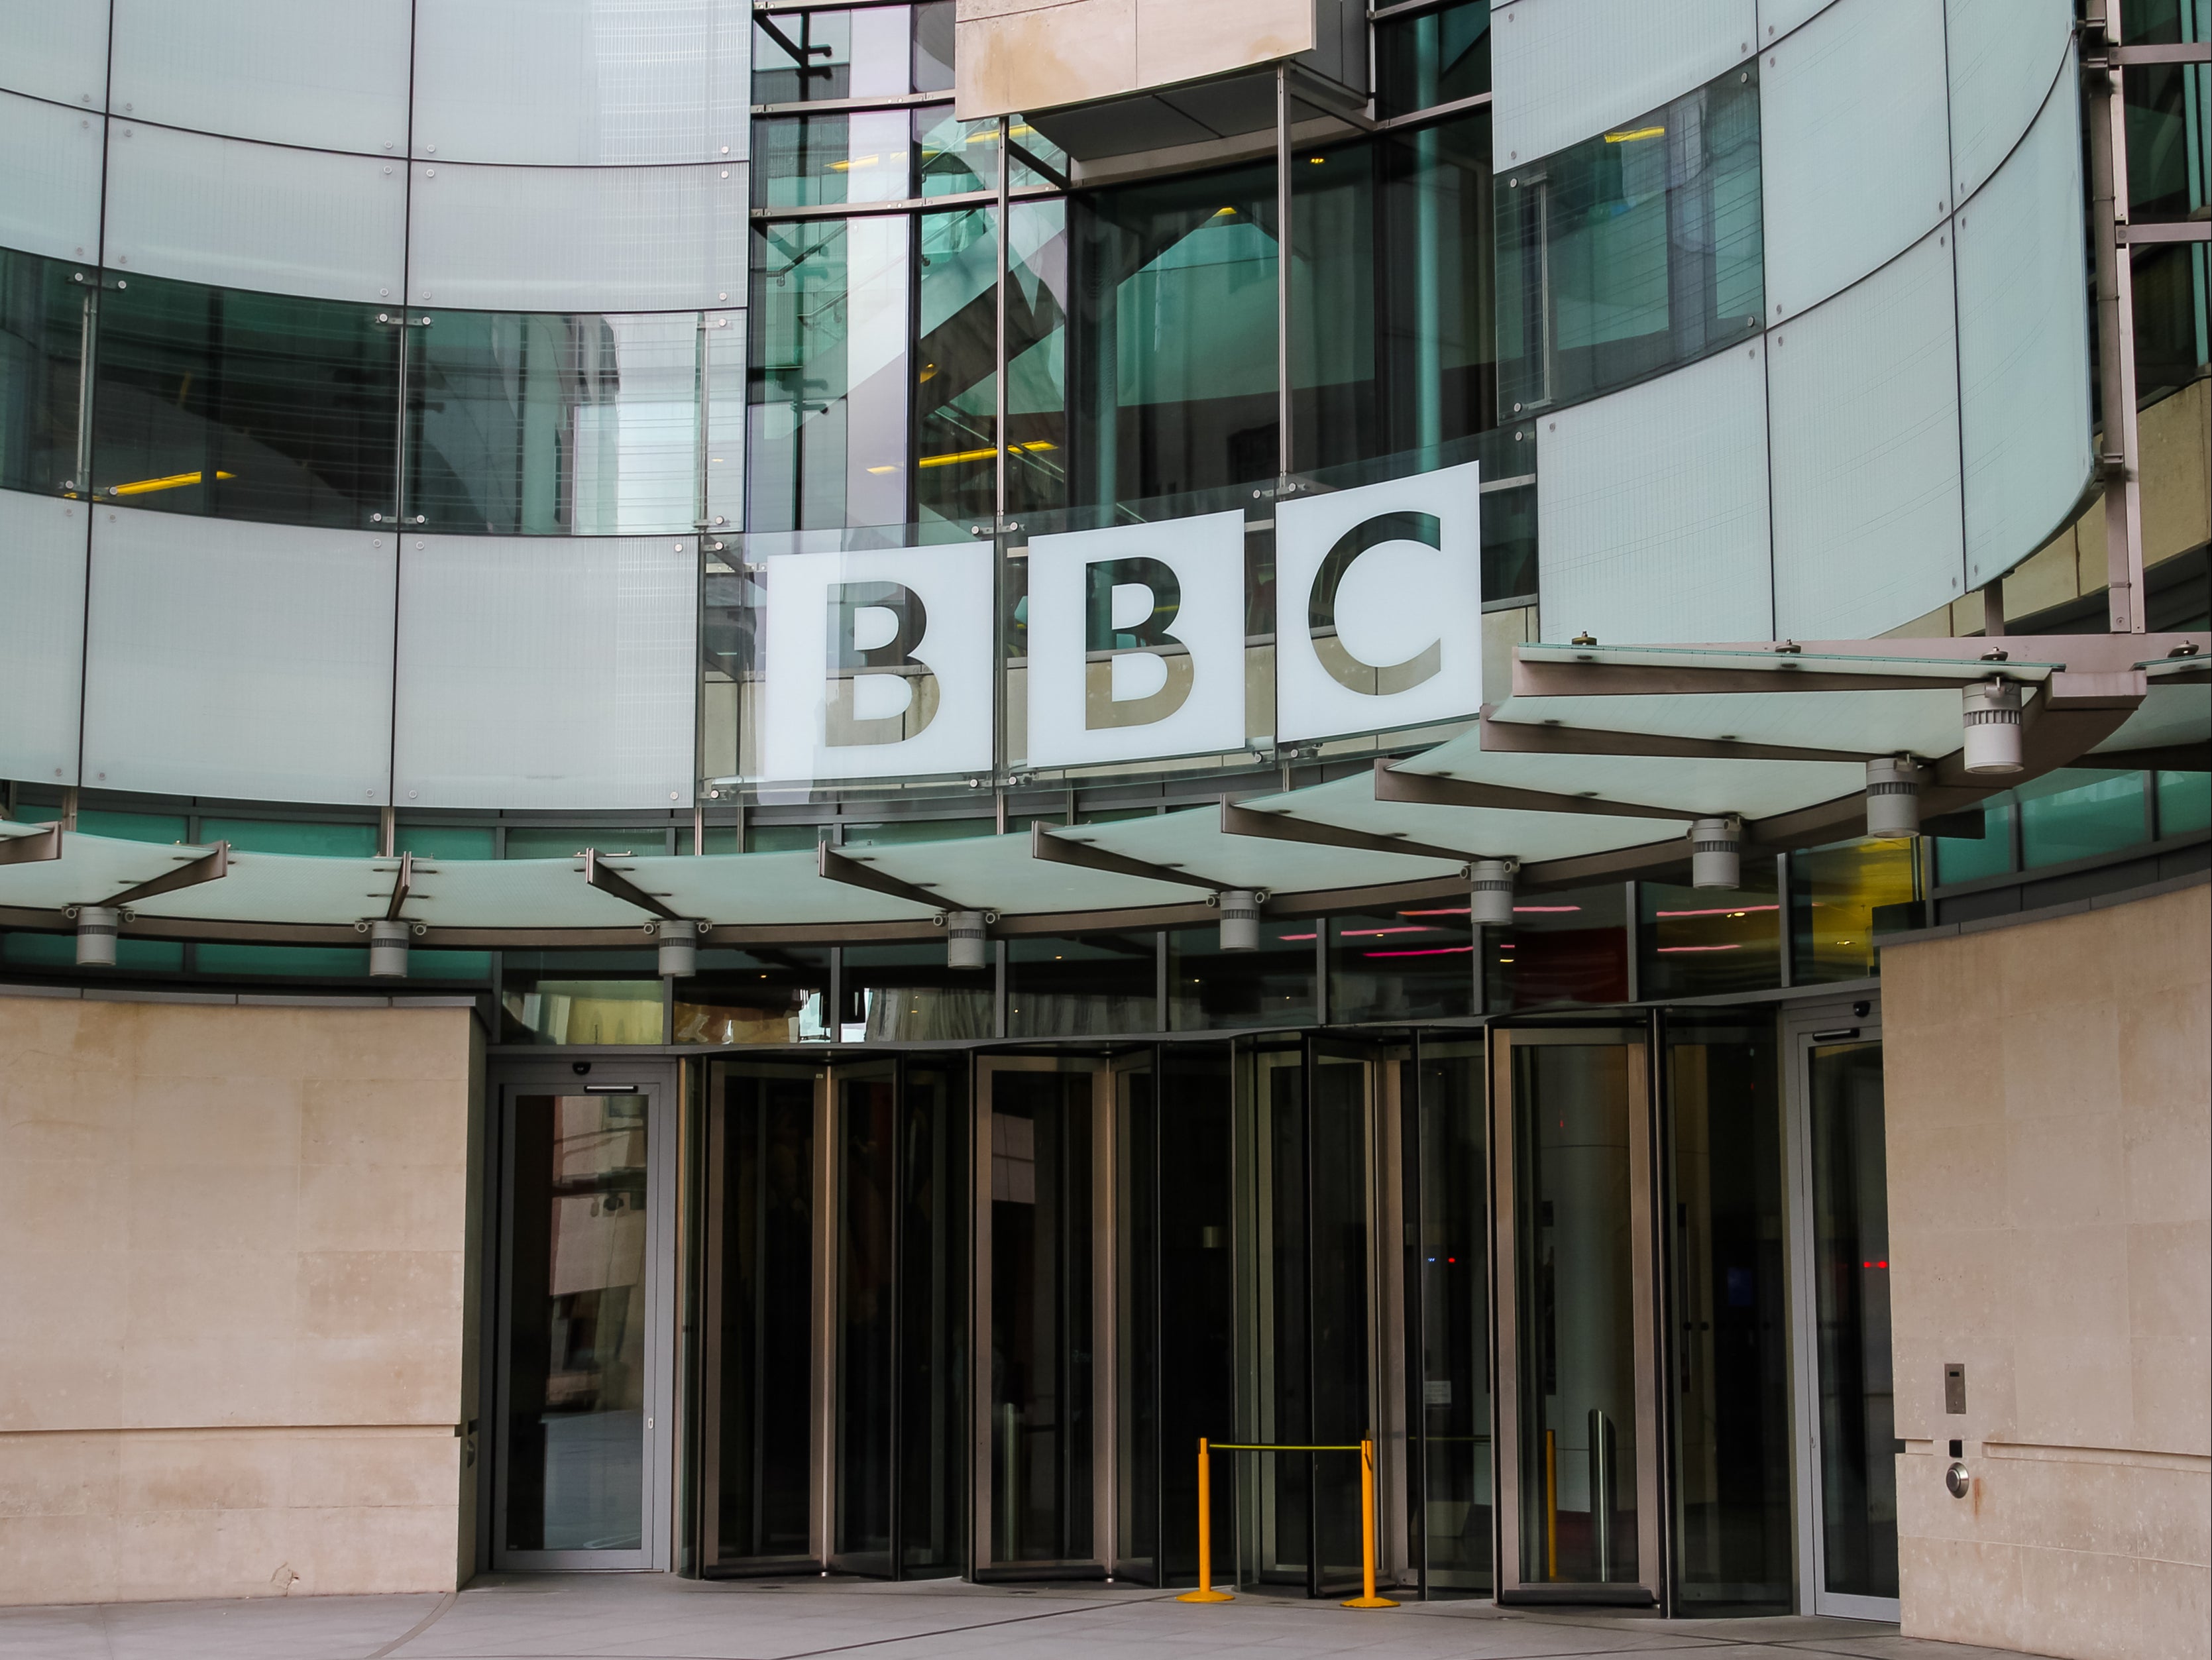 The BBC has been blocked from identifying an alleged informant in their programme